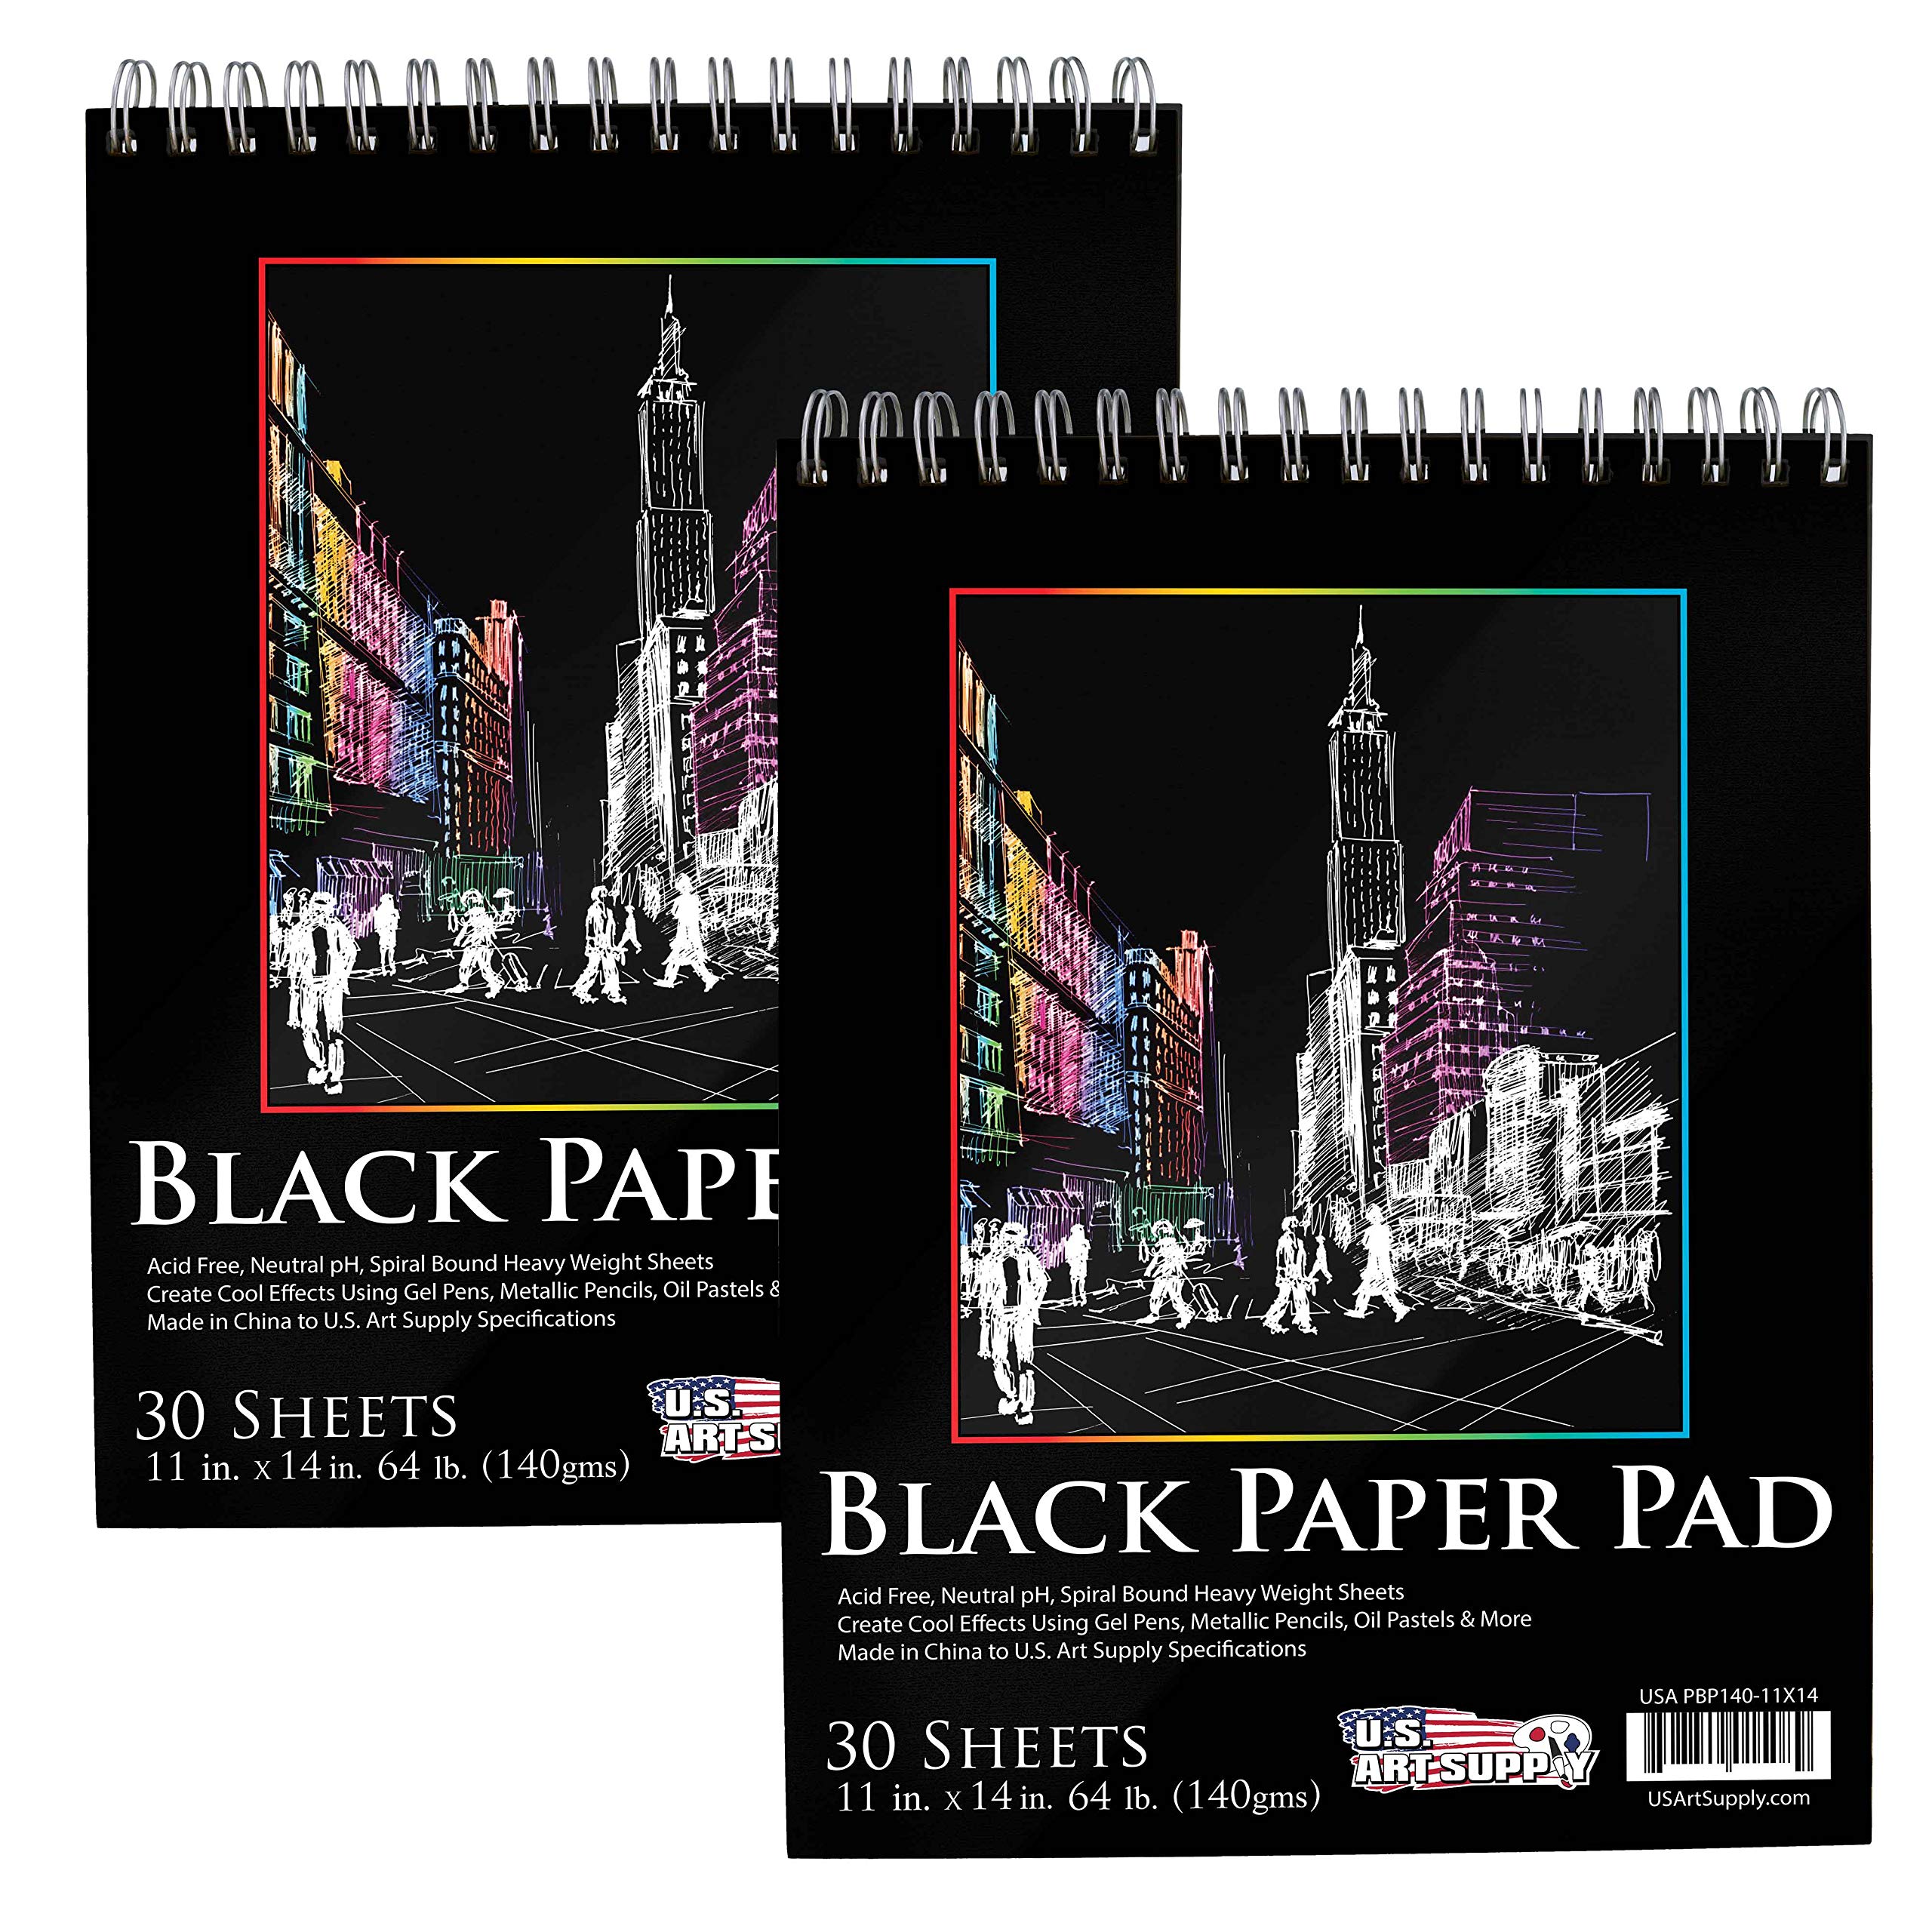 Multi-purpose Neon Heavyweight Paper, Assorted Colors, 8 1/2 x 11, 100  sheets